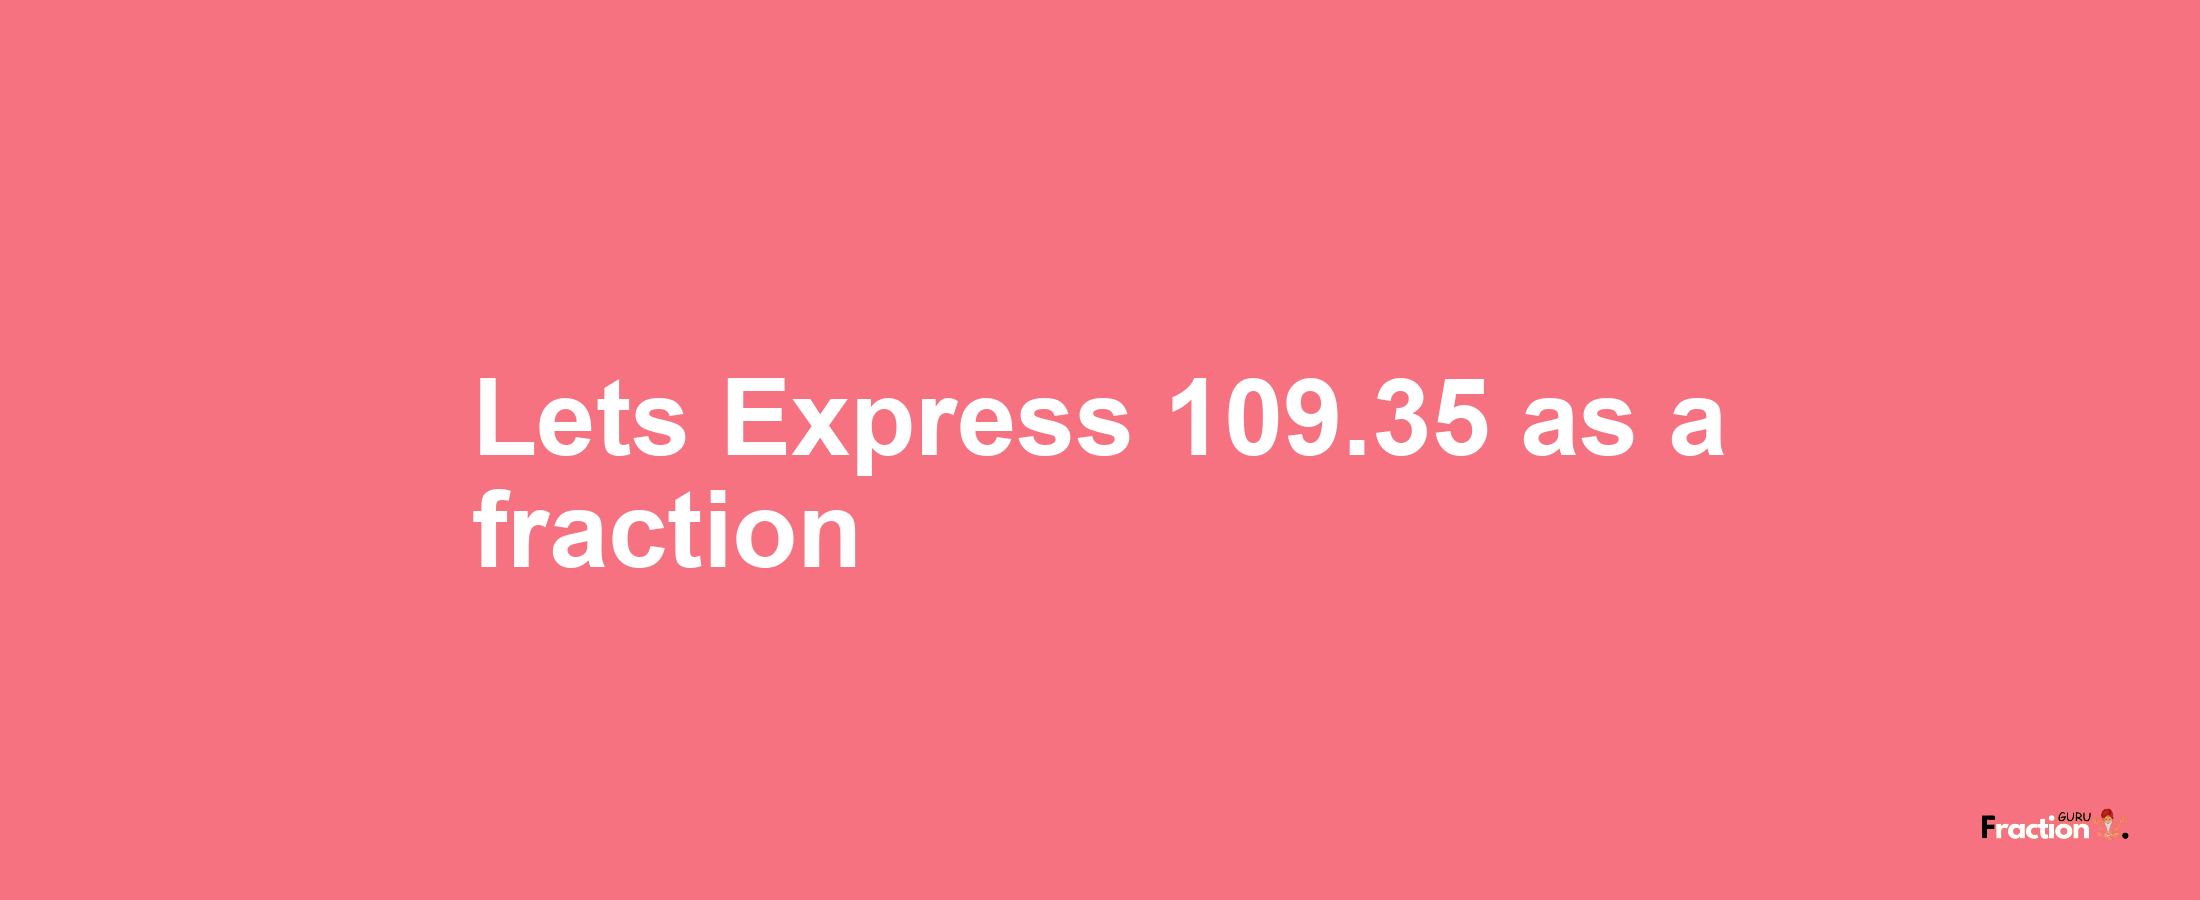 Lets Express 109.35 as afraction